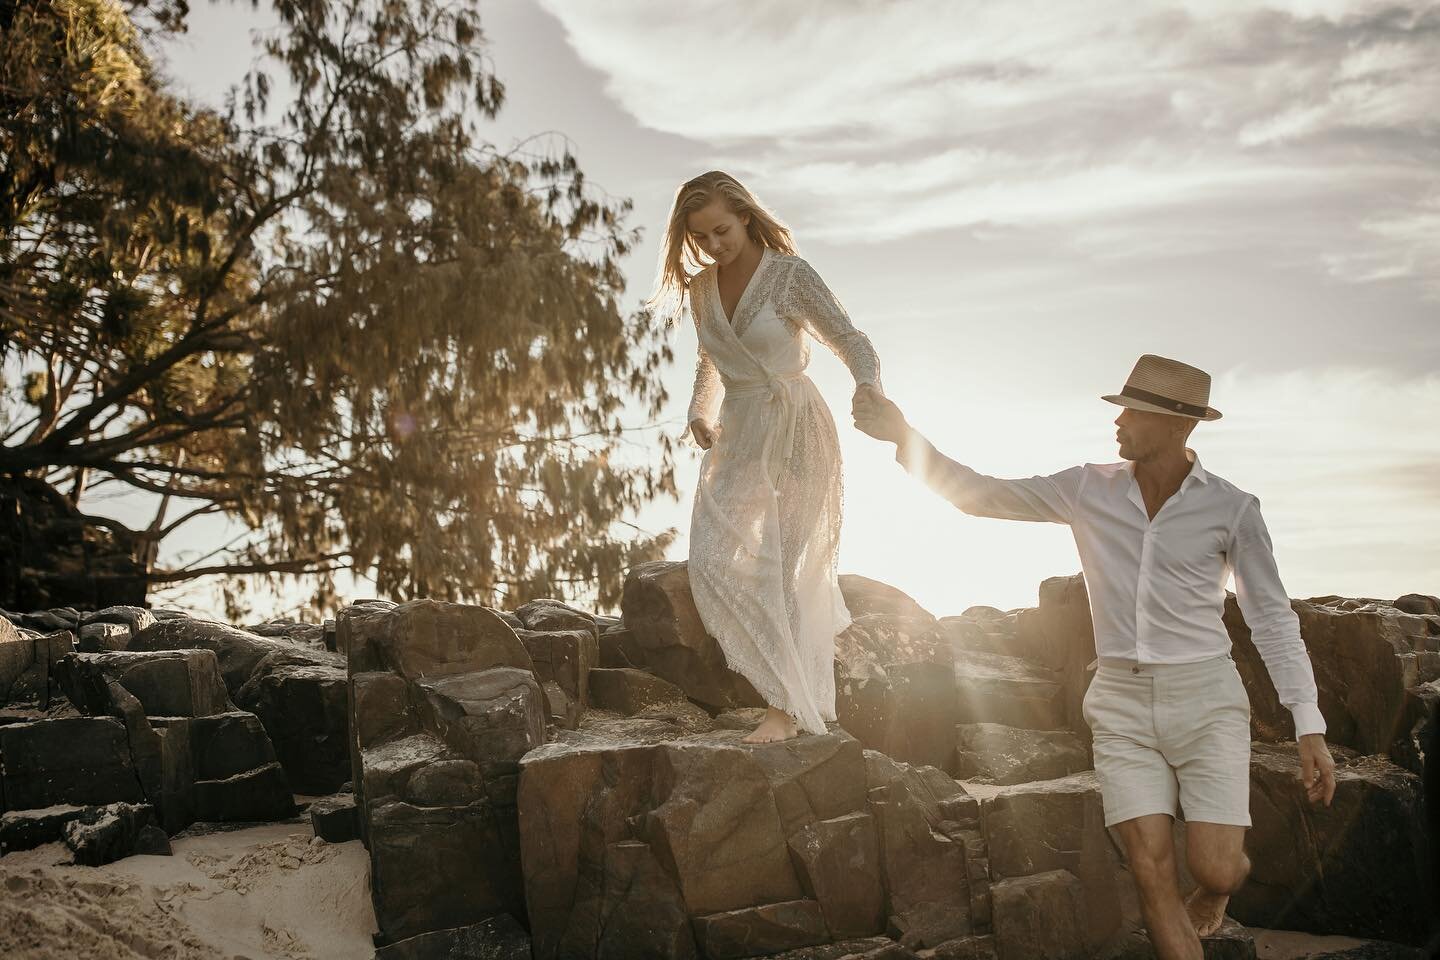 An unforgettable elopement moment: Hugo + Nicolle exchanged vows at Hidden Grove, Noosa, followed by at Little Cove. Nicolle was radiant in her stunning @coven_and_co gown. 💍✨

🤍Wedding Details🤍

Celebrant: @noosaweddinglove 
Photographer: @natura